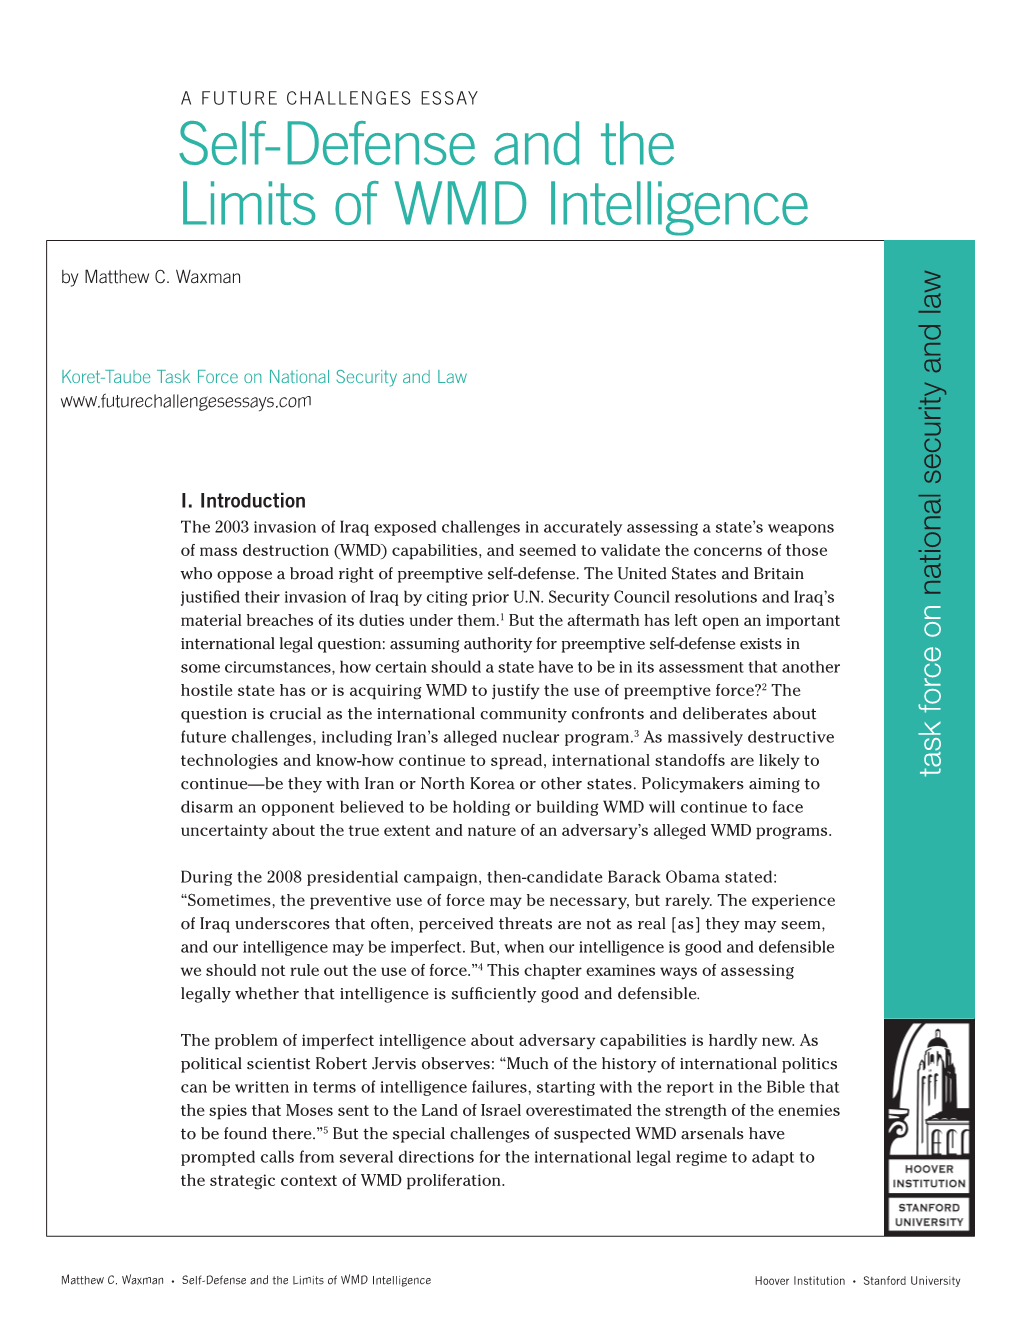 Self-Defense and the Limits of WMD Intelligence